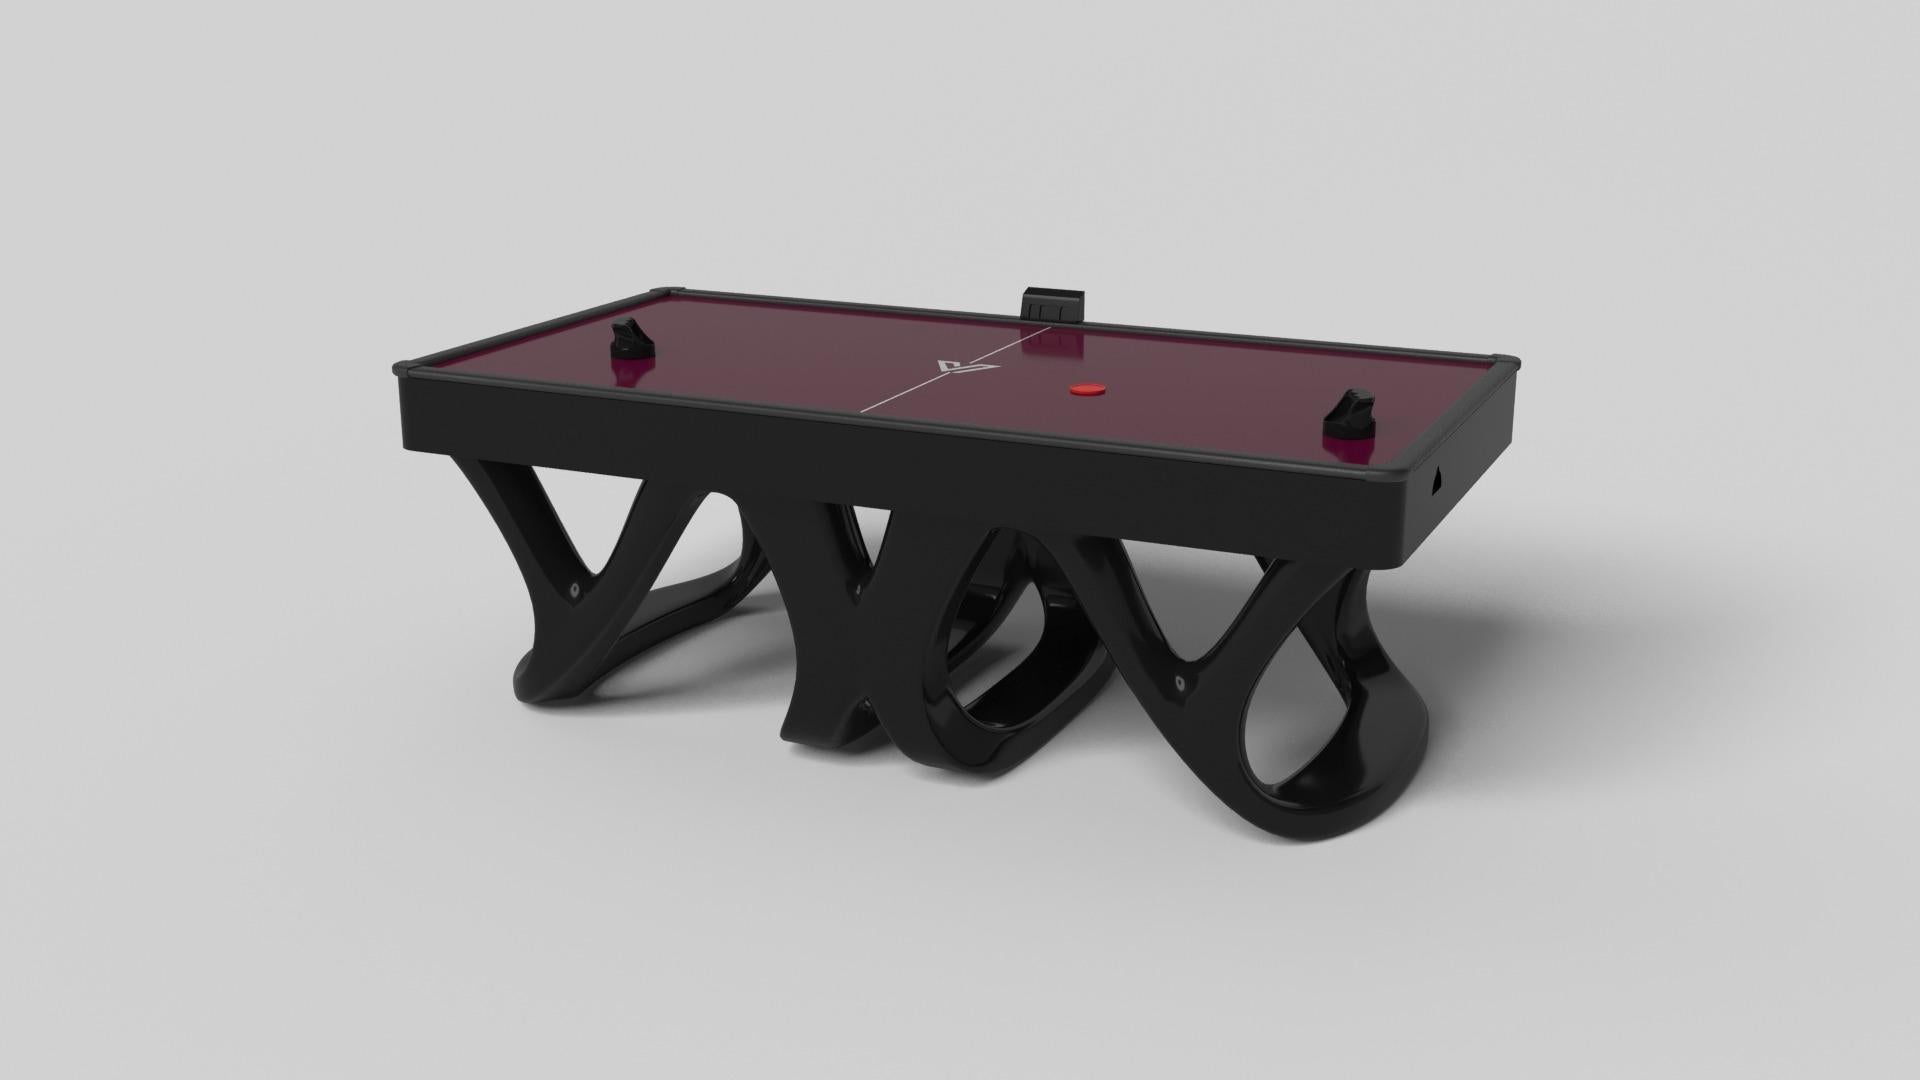 Inspired by the work of Antoni Gaudi and the movement of Catalan Modernism, the Draco air hockey table in walnut boasts bold style with smooth, curved legs and a crisp black top. Expertly crafted from hard wood, this table features a high-end,